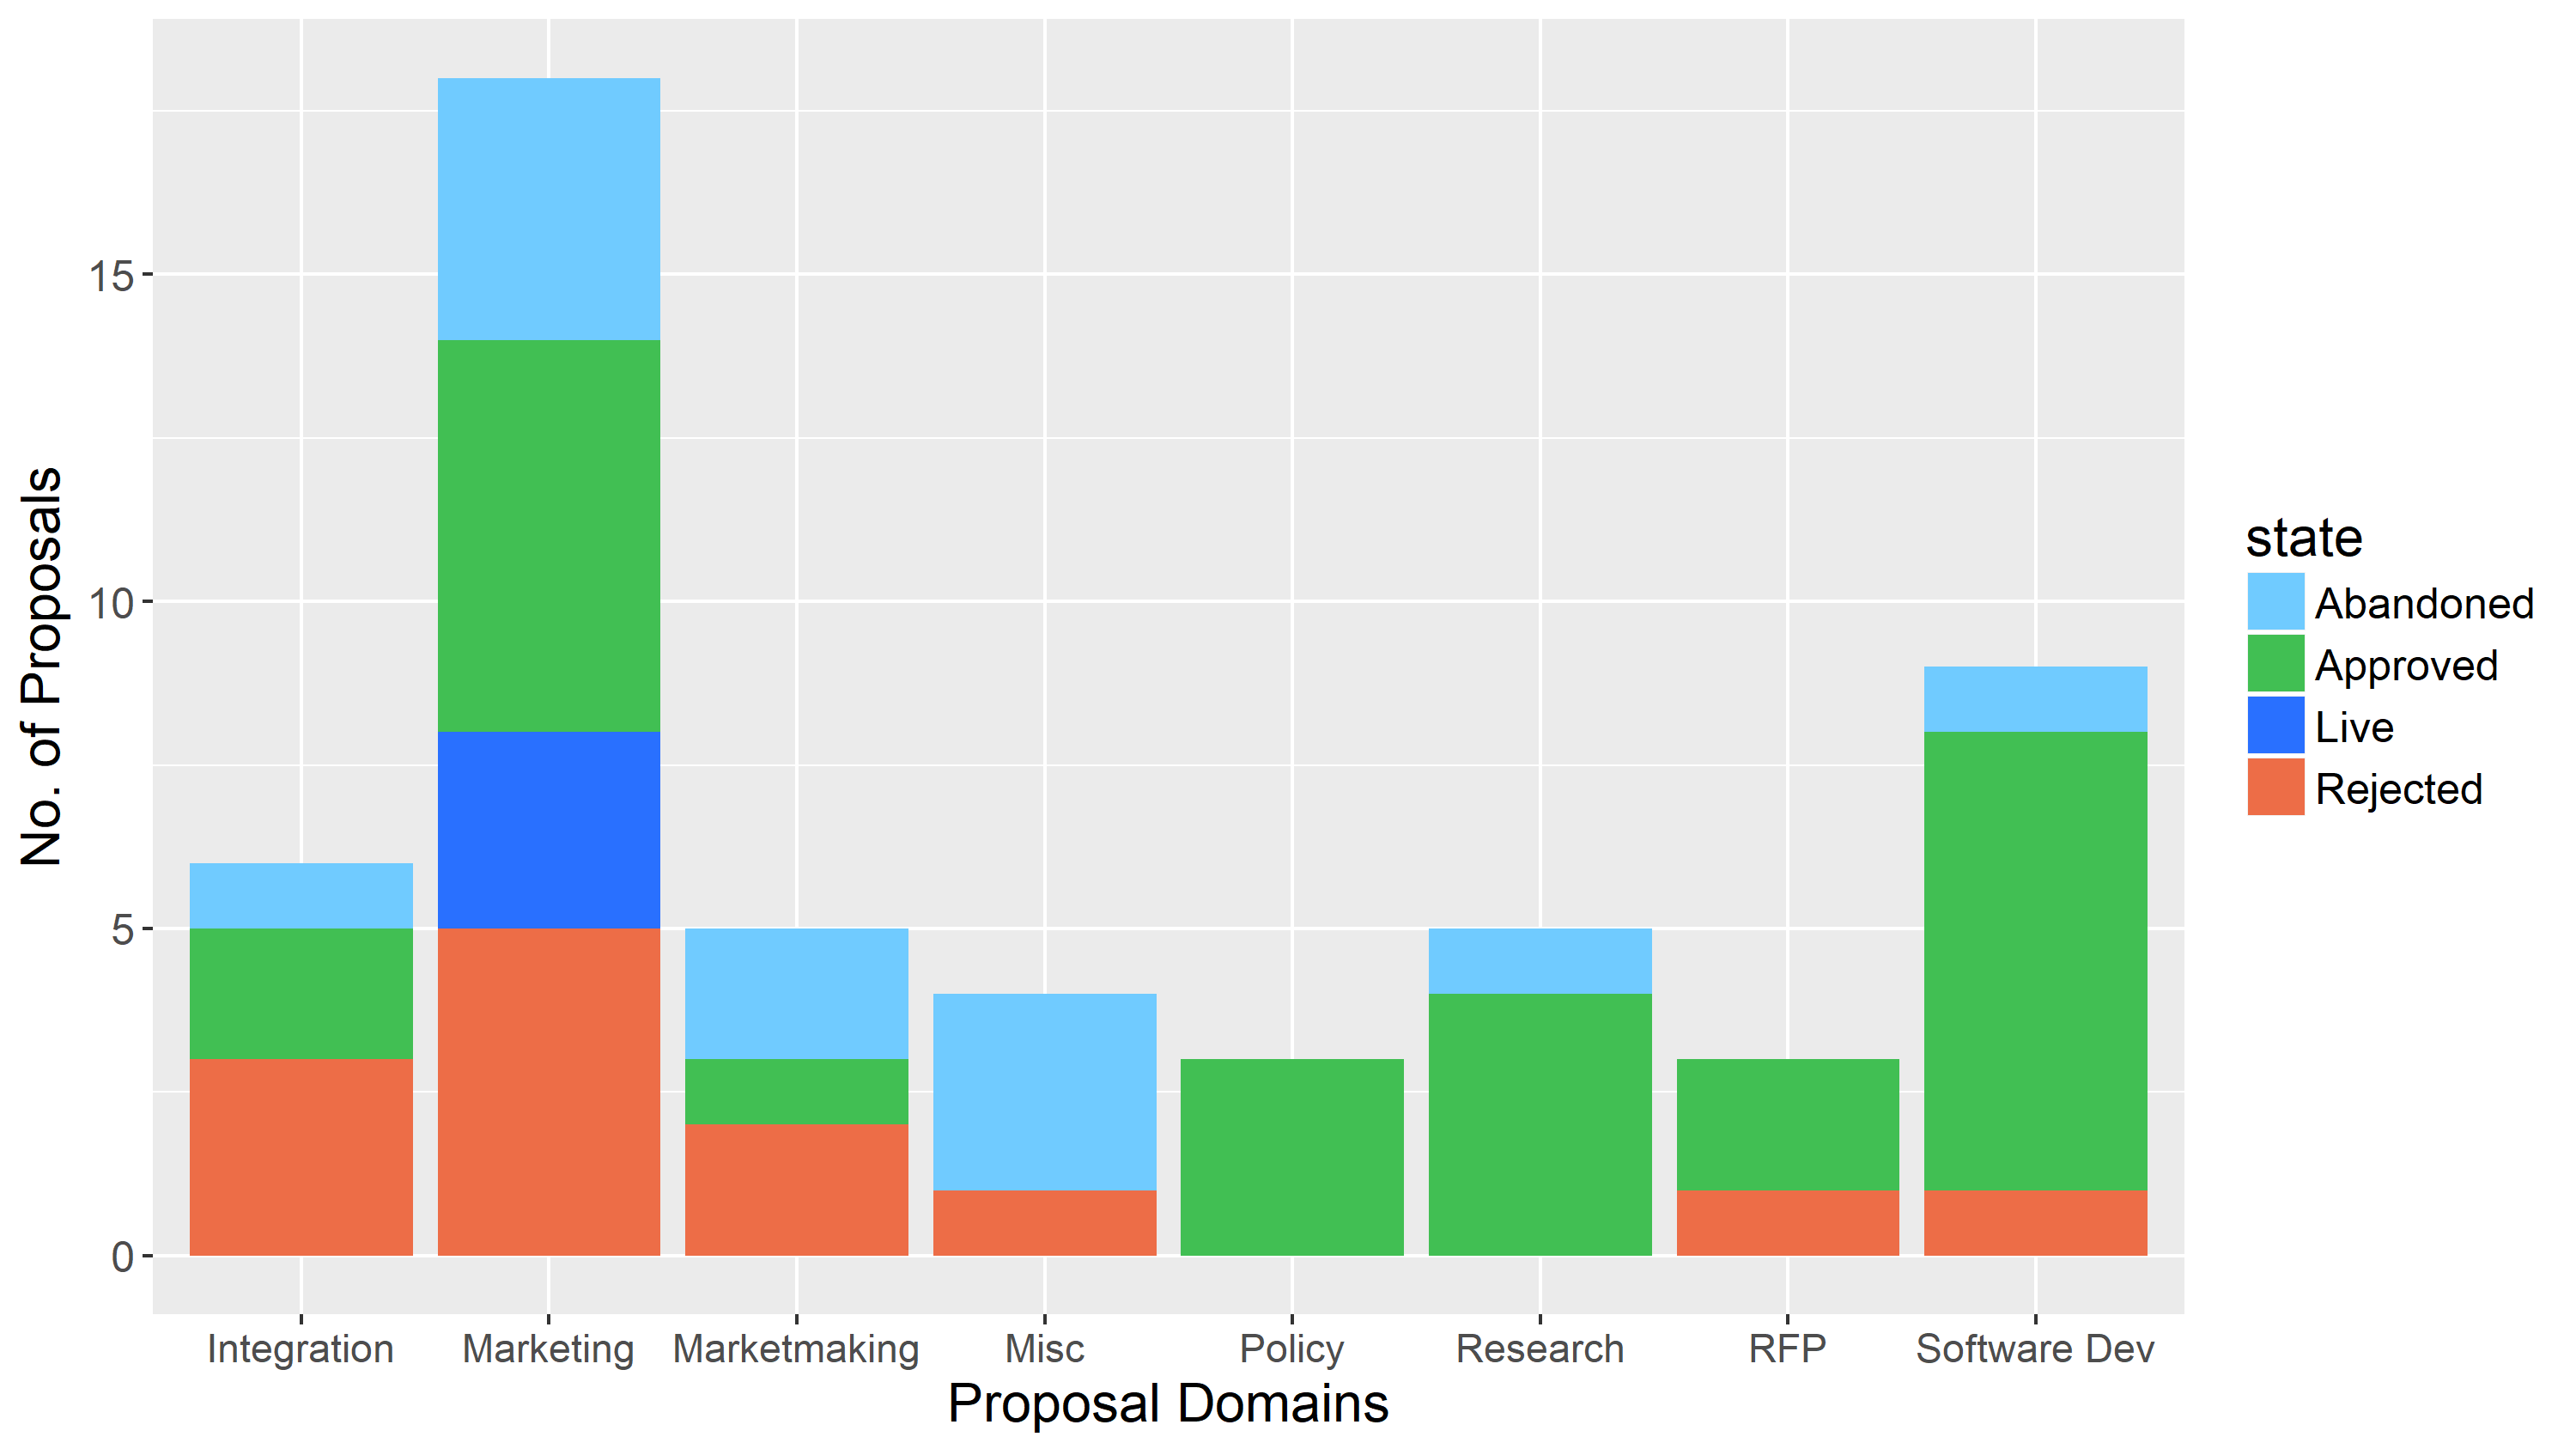 Outcomes for proposals in each domain